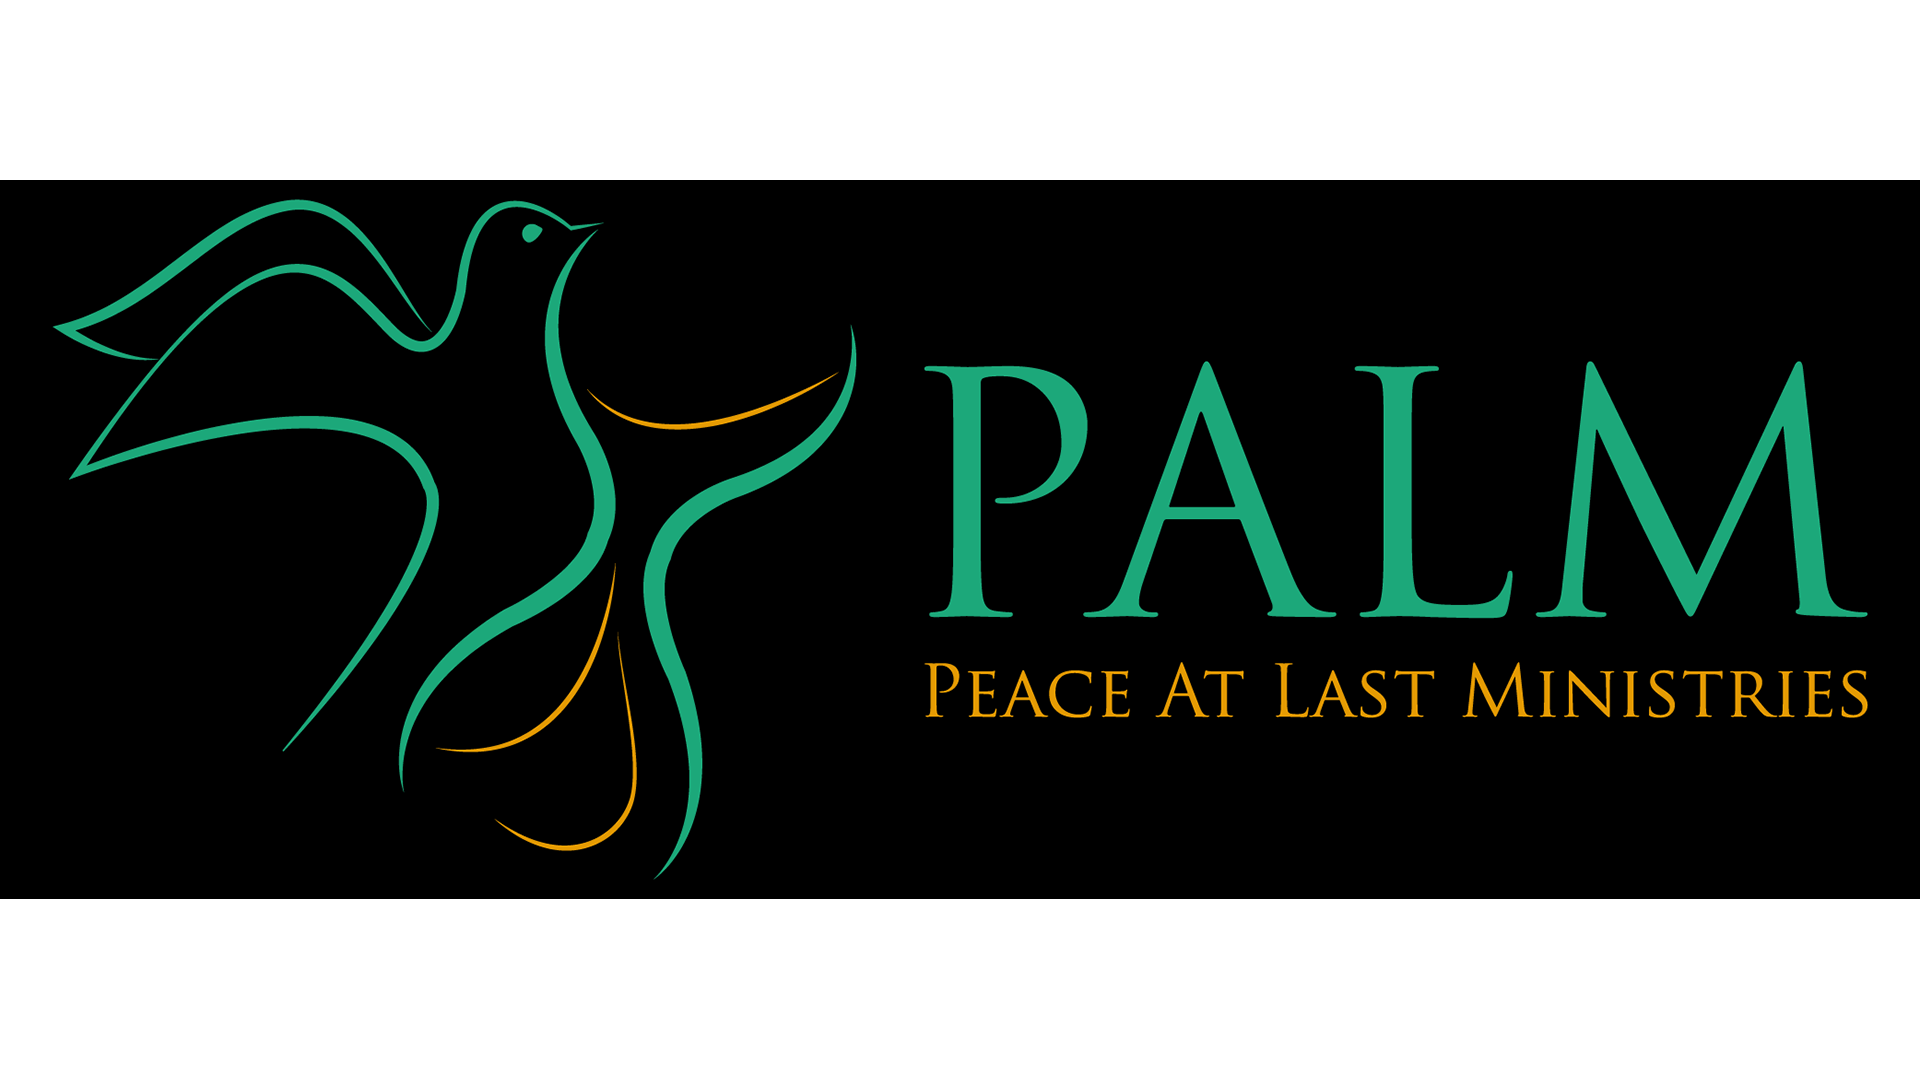 Peace-At-Last Ministries (PALM) logo